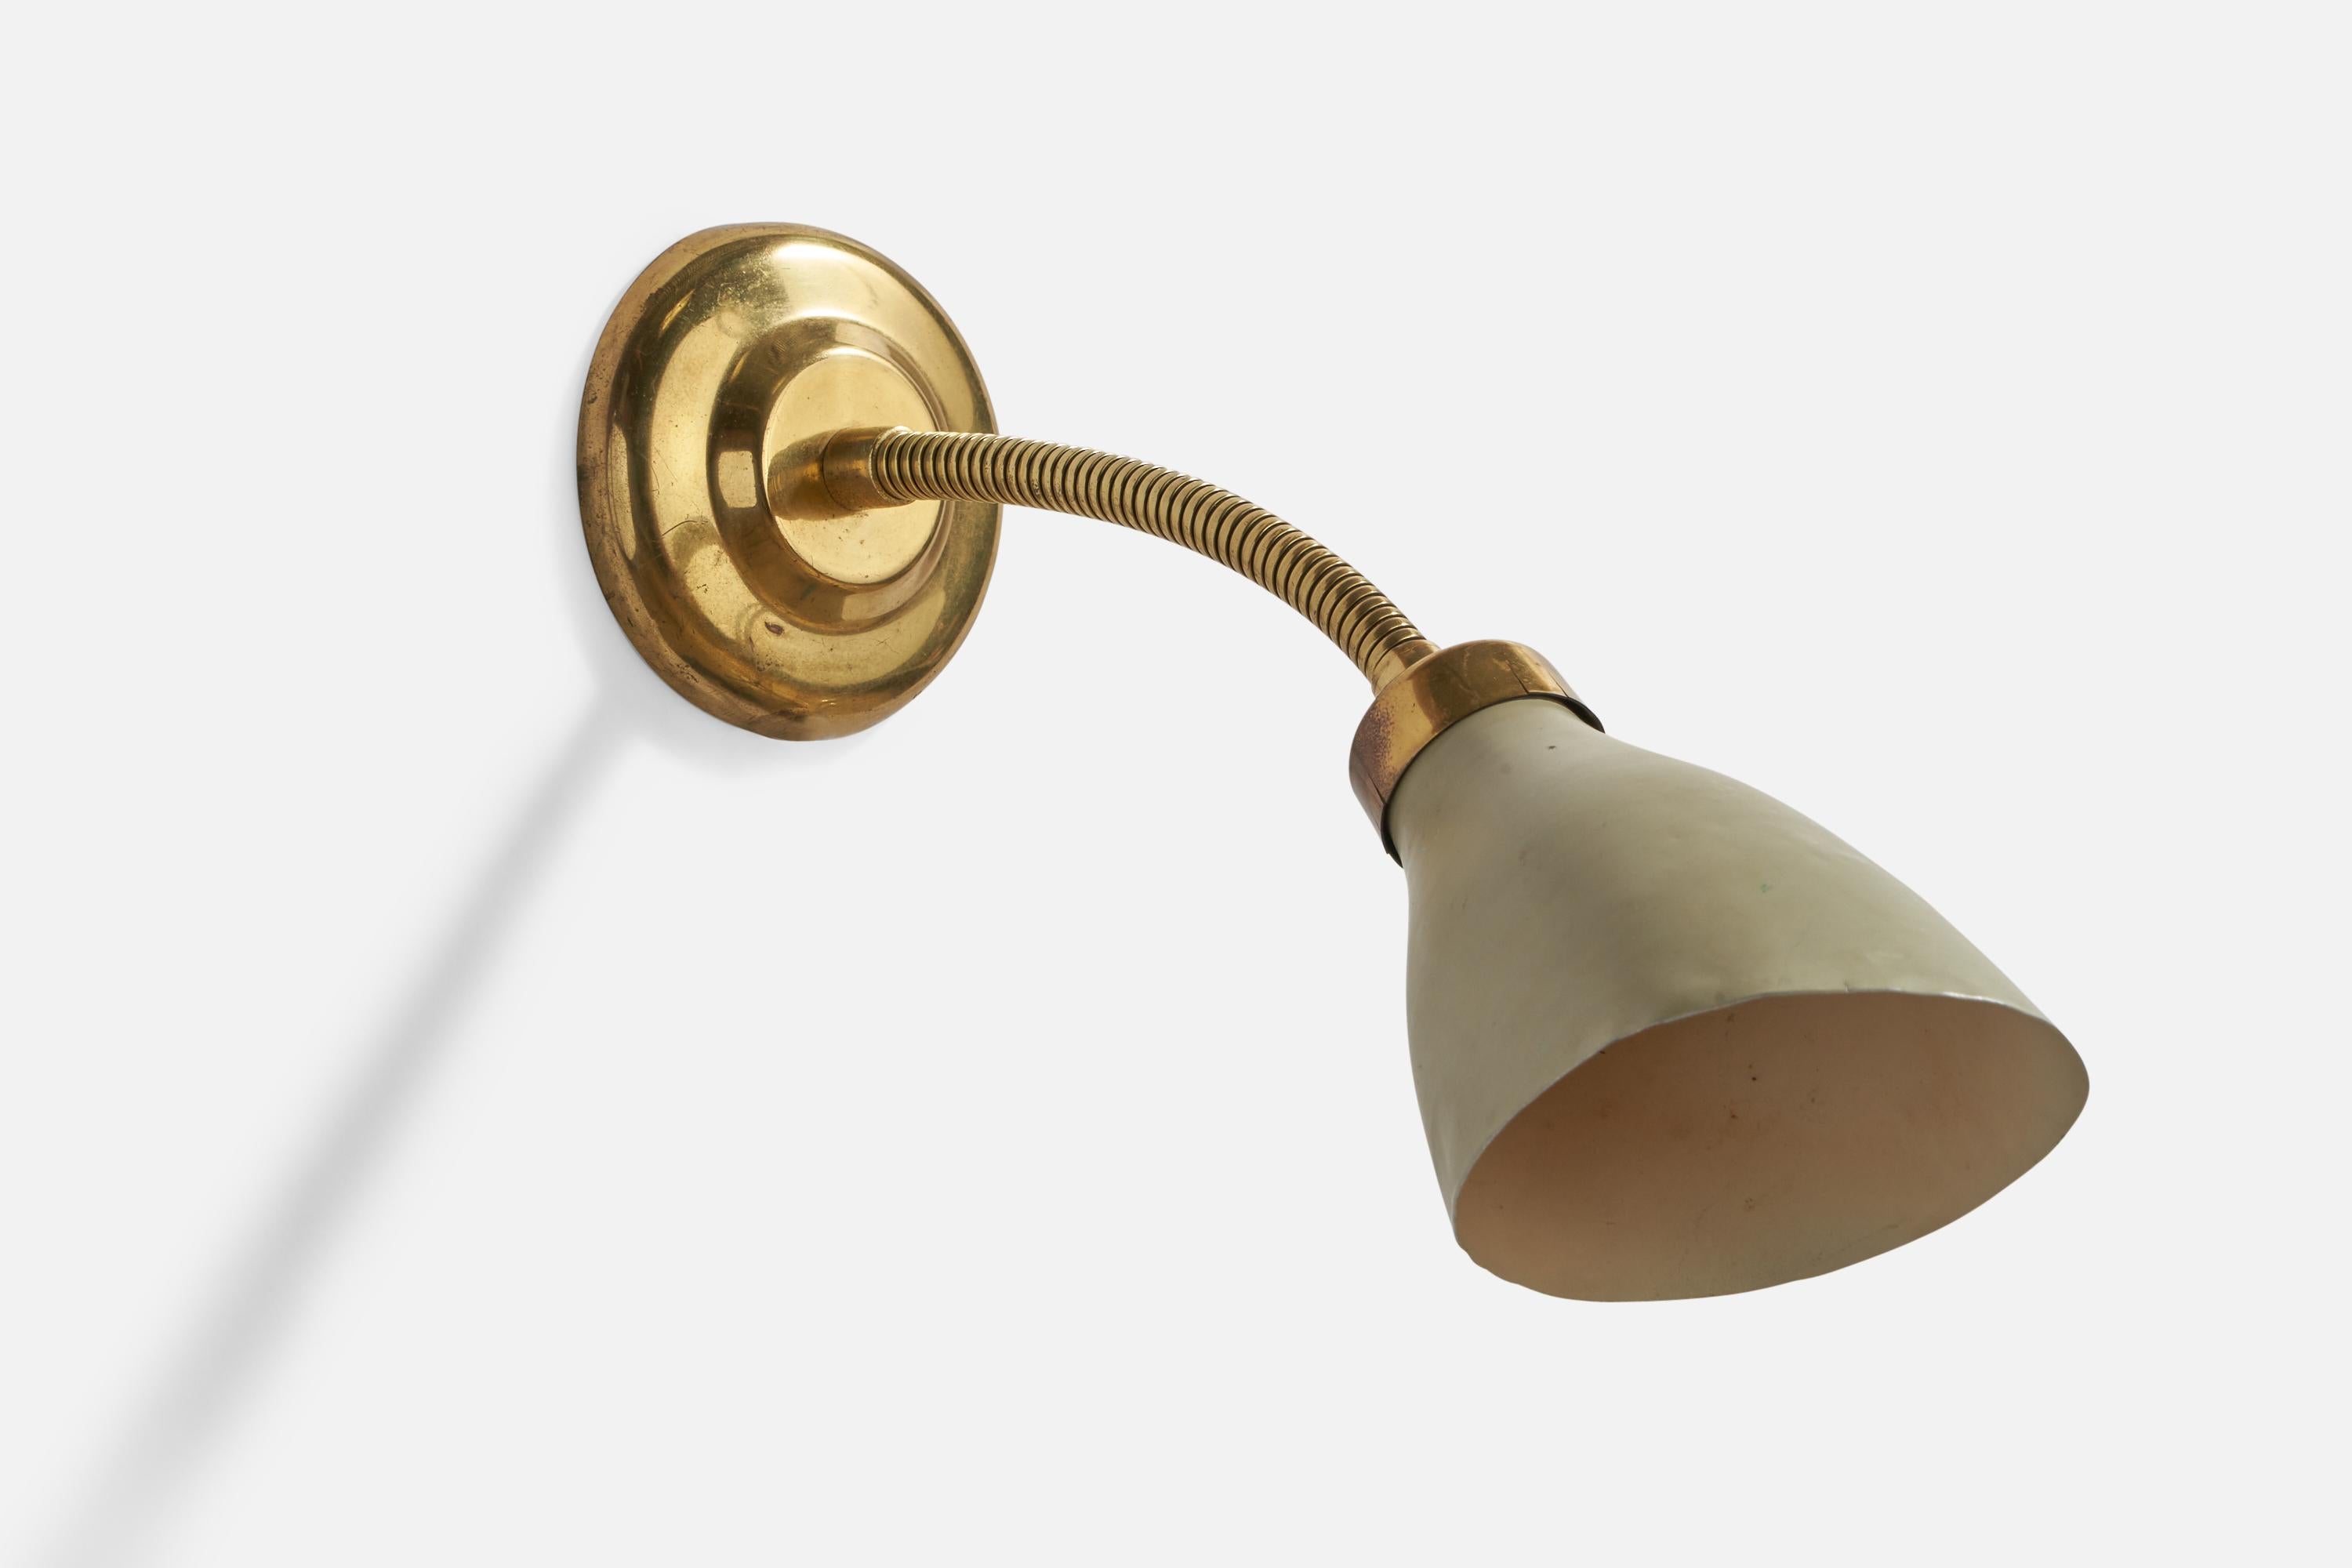 An adjustable brass and beige-lacquered metal wall light designed and produced in by Elidus, Sweden, c. 1940s.

Overall Dimensions (inches): 9.75” H x 4.3” W x 12.2” D
Back Plate Dimensions (inches): 4.25” Diameter x 0.8” Depth
Bulb Specifications: